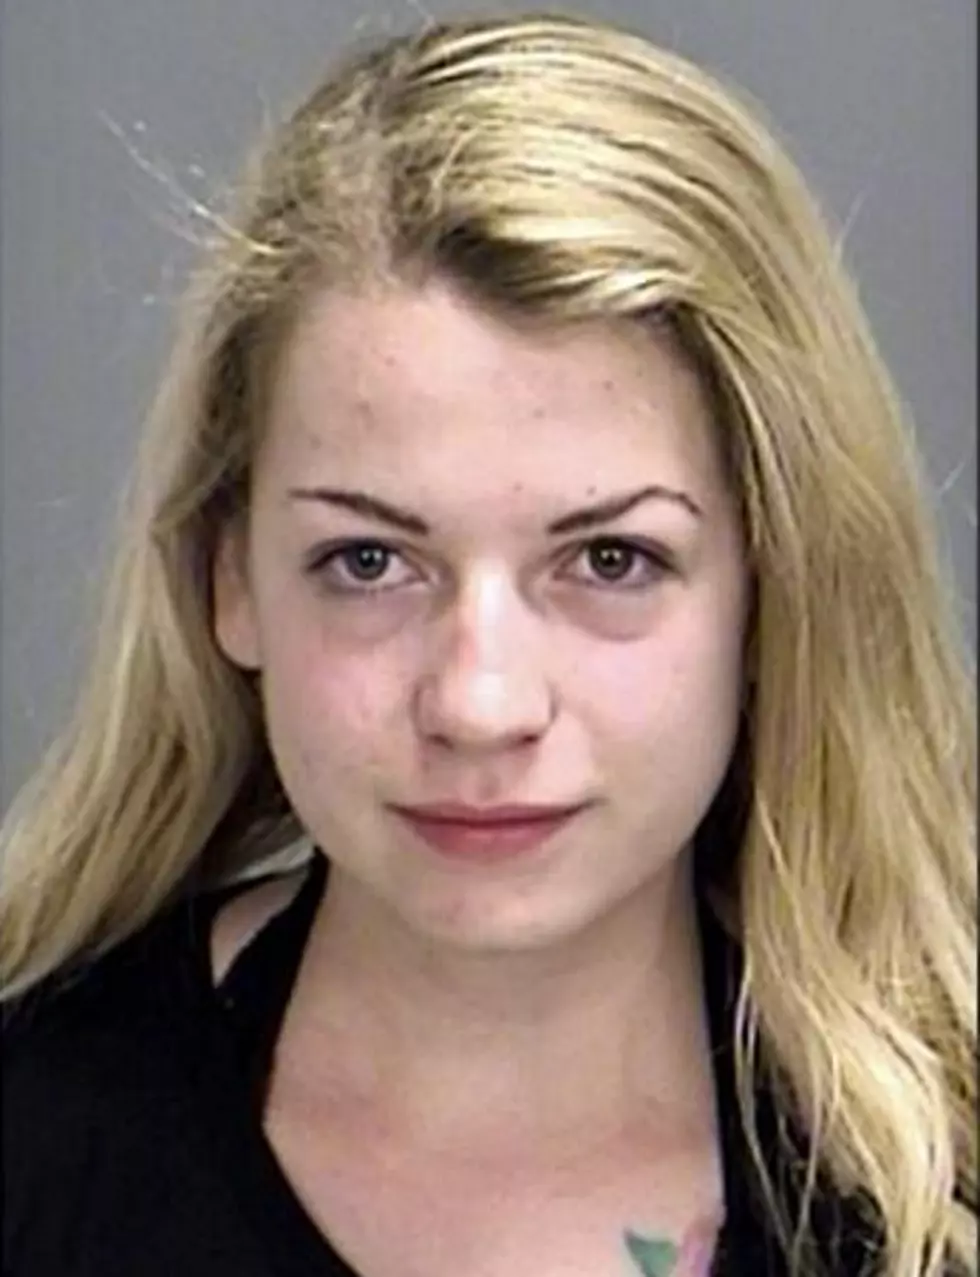 Student Attempting to Take Nude Selfie Drives Into Police Car